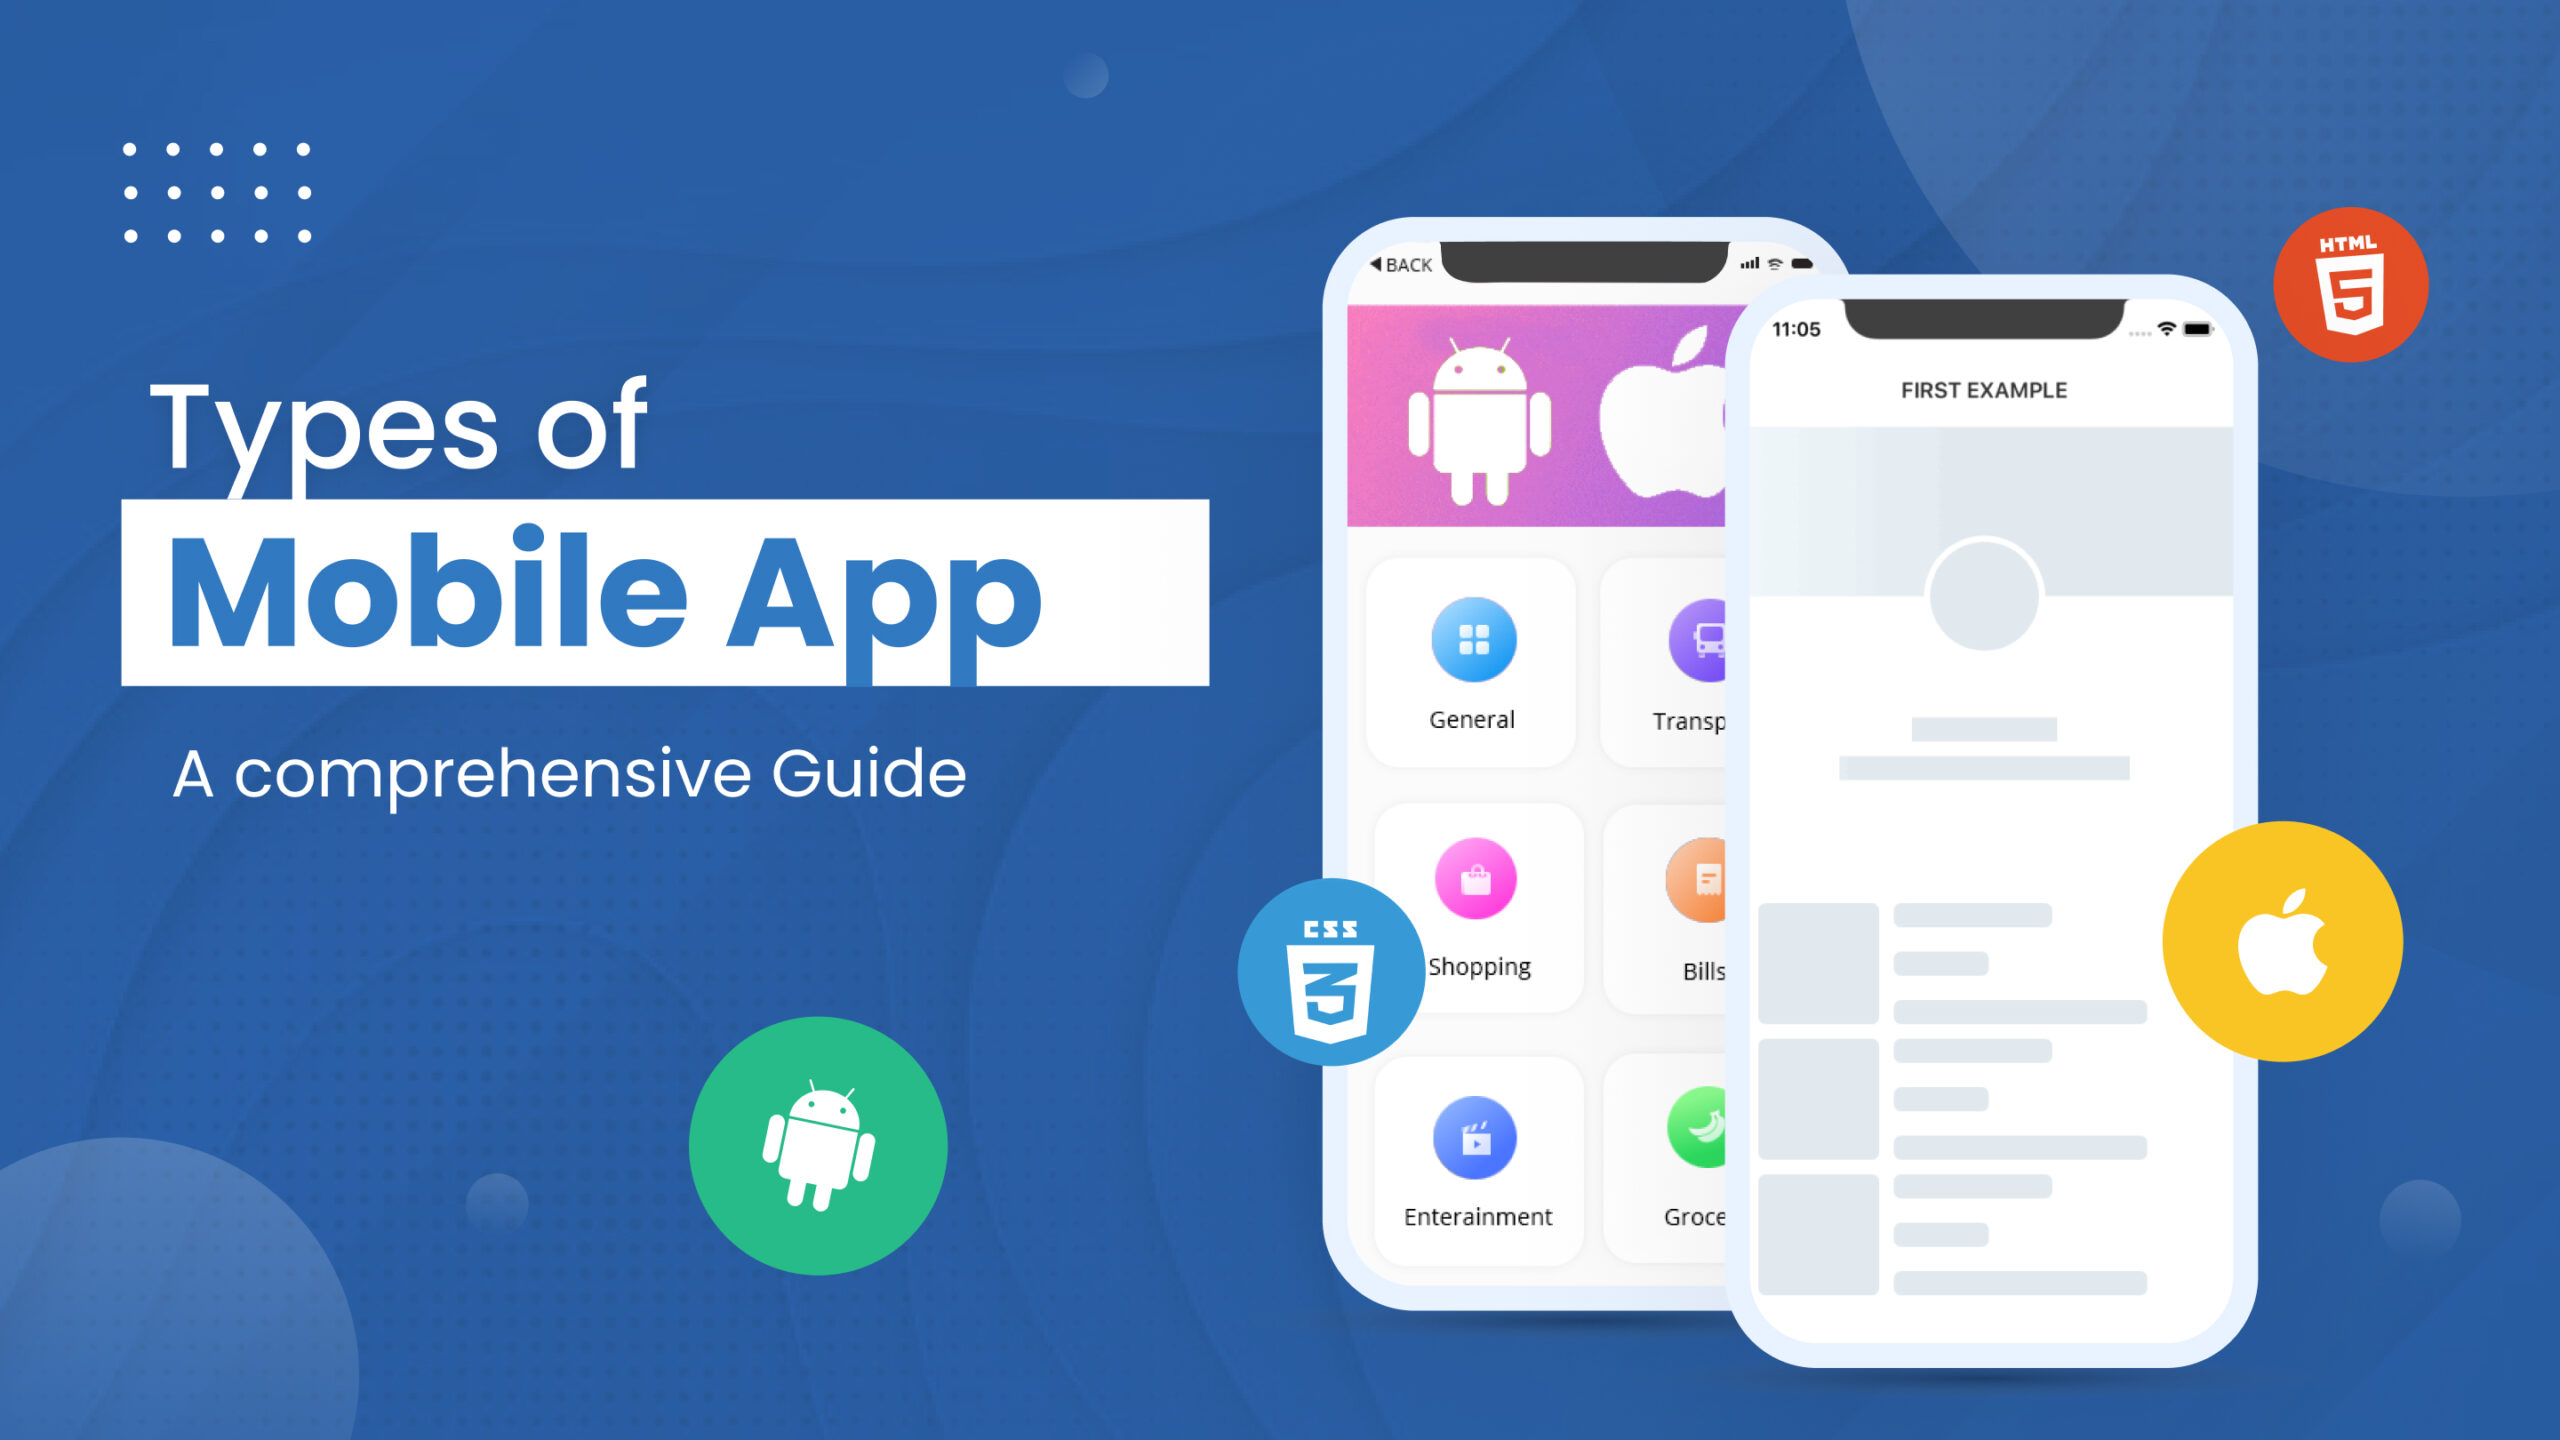 Types of Mobile Apps: A Comprehensive Guide